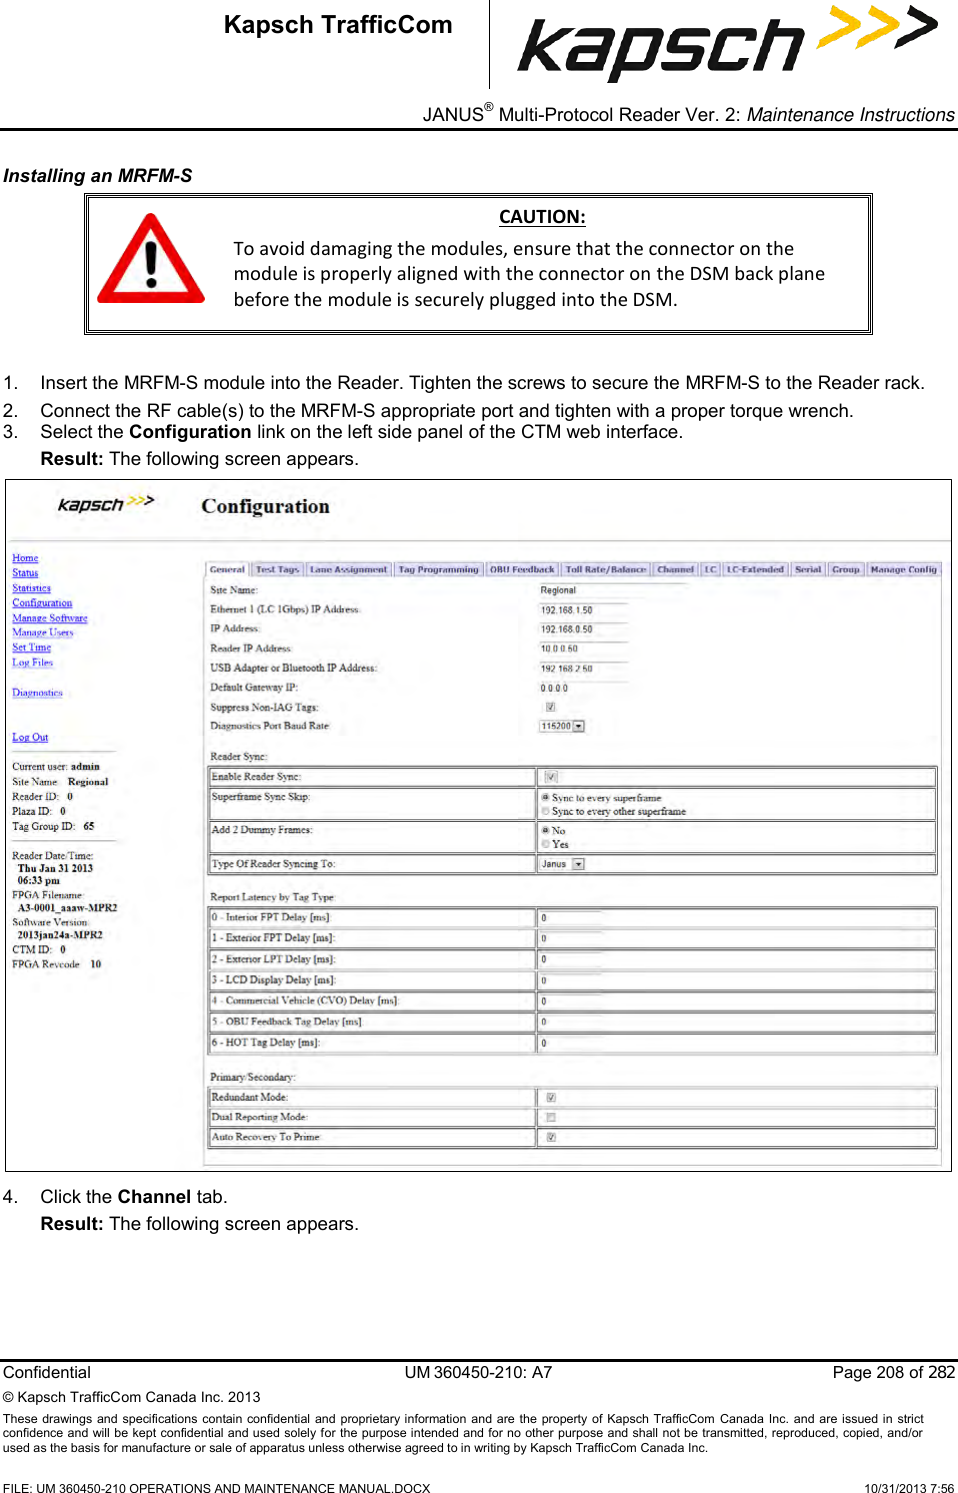 _ JANUS® Multi-Protocol Reader Ver. 2: Maintenance Instructions   Confidential  UM 360450-210: A7  Page 208 of 282 © Kapsch TrafficCom Canada Inc. 2013 These  drawings and specifications contain confidential  and  proprietary information and are  the  property of Kapsch TrafficCom  Canada Inc.  and are issued in strict confidence and will be kept confidential and used solely for the purpose intended and for no other purpose and shall not be transmitted, reproduced, copied, and/or used as the basis for manufacture or sale of apparatus unless otherwise agreed to in writing by Kapsch TrafficCom Canada Inc.    FILE: UM 360450-210 OPERATIONS AND MAINTENANCE MANUAL.DOCX    10/31/2013 7:56 Kapsch TrafficCom Installing an MRFM-S   CAUTION: To avoid damaging the modules, ensure that the connector on the module is properly aligned with the connector on the DSM back plane before the module is securely plugged into the DSM.  1.  Insert the MRFM-S module into the Reader. Tighten the screws to secure the MRFM-S to the Reader rack. 2.  Connect the RF cable(s) to the MRFM-S appropriate port and tighten with a proper torque wrench. 3.  Select the Configuration link on the left side panel of the CTM web interface. Result: The following screen appears.  4.  Click the Channel tab. Result: The following screen appears. 